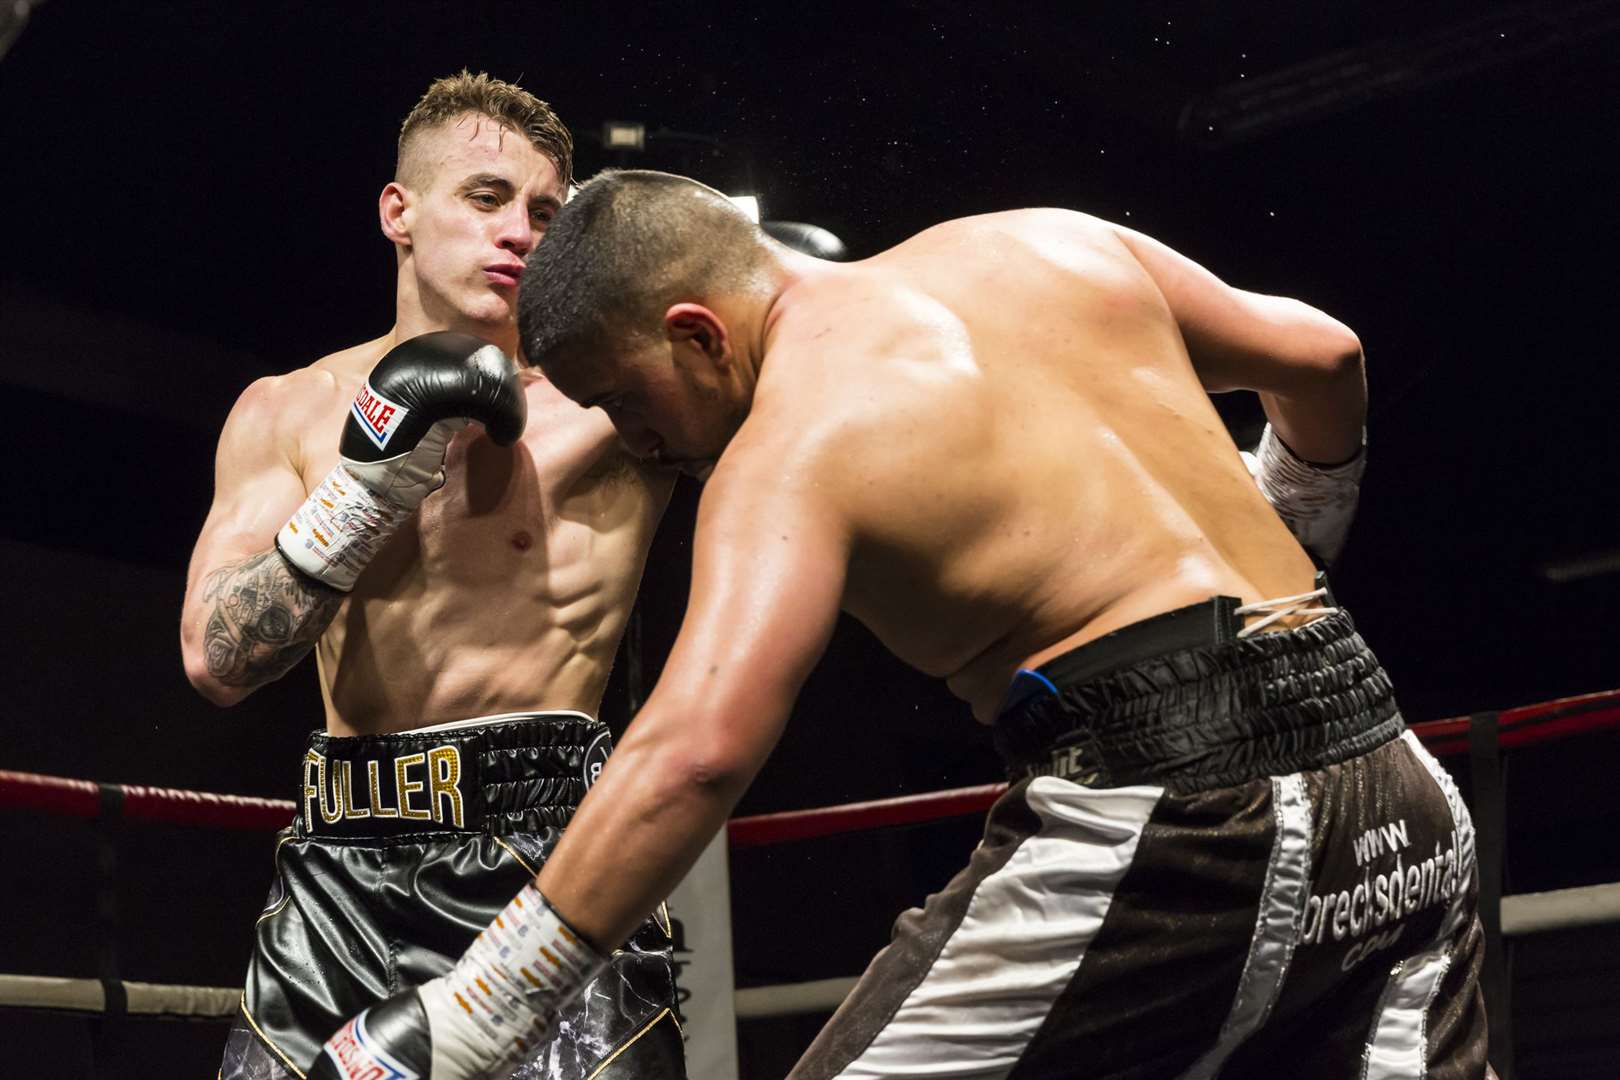 Maidstone boxer Lenny Fuller, left Picture: Countrywide Photographic